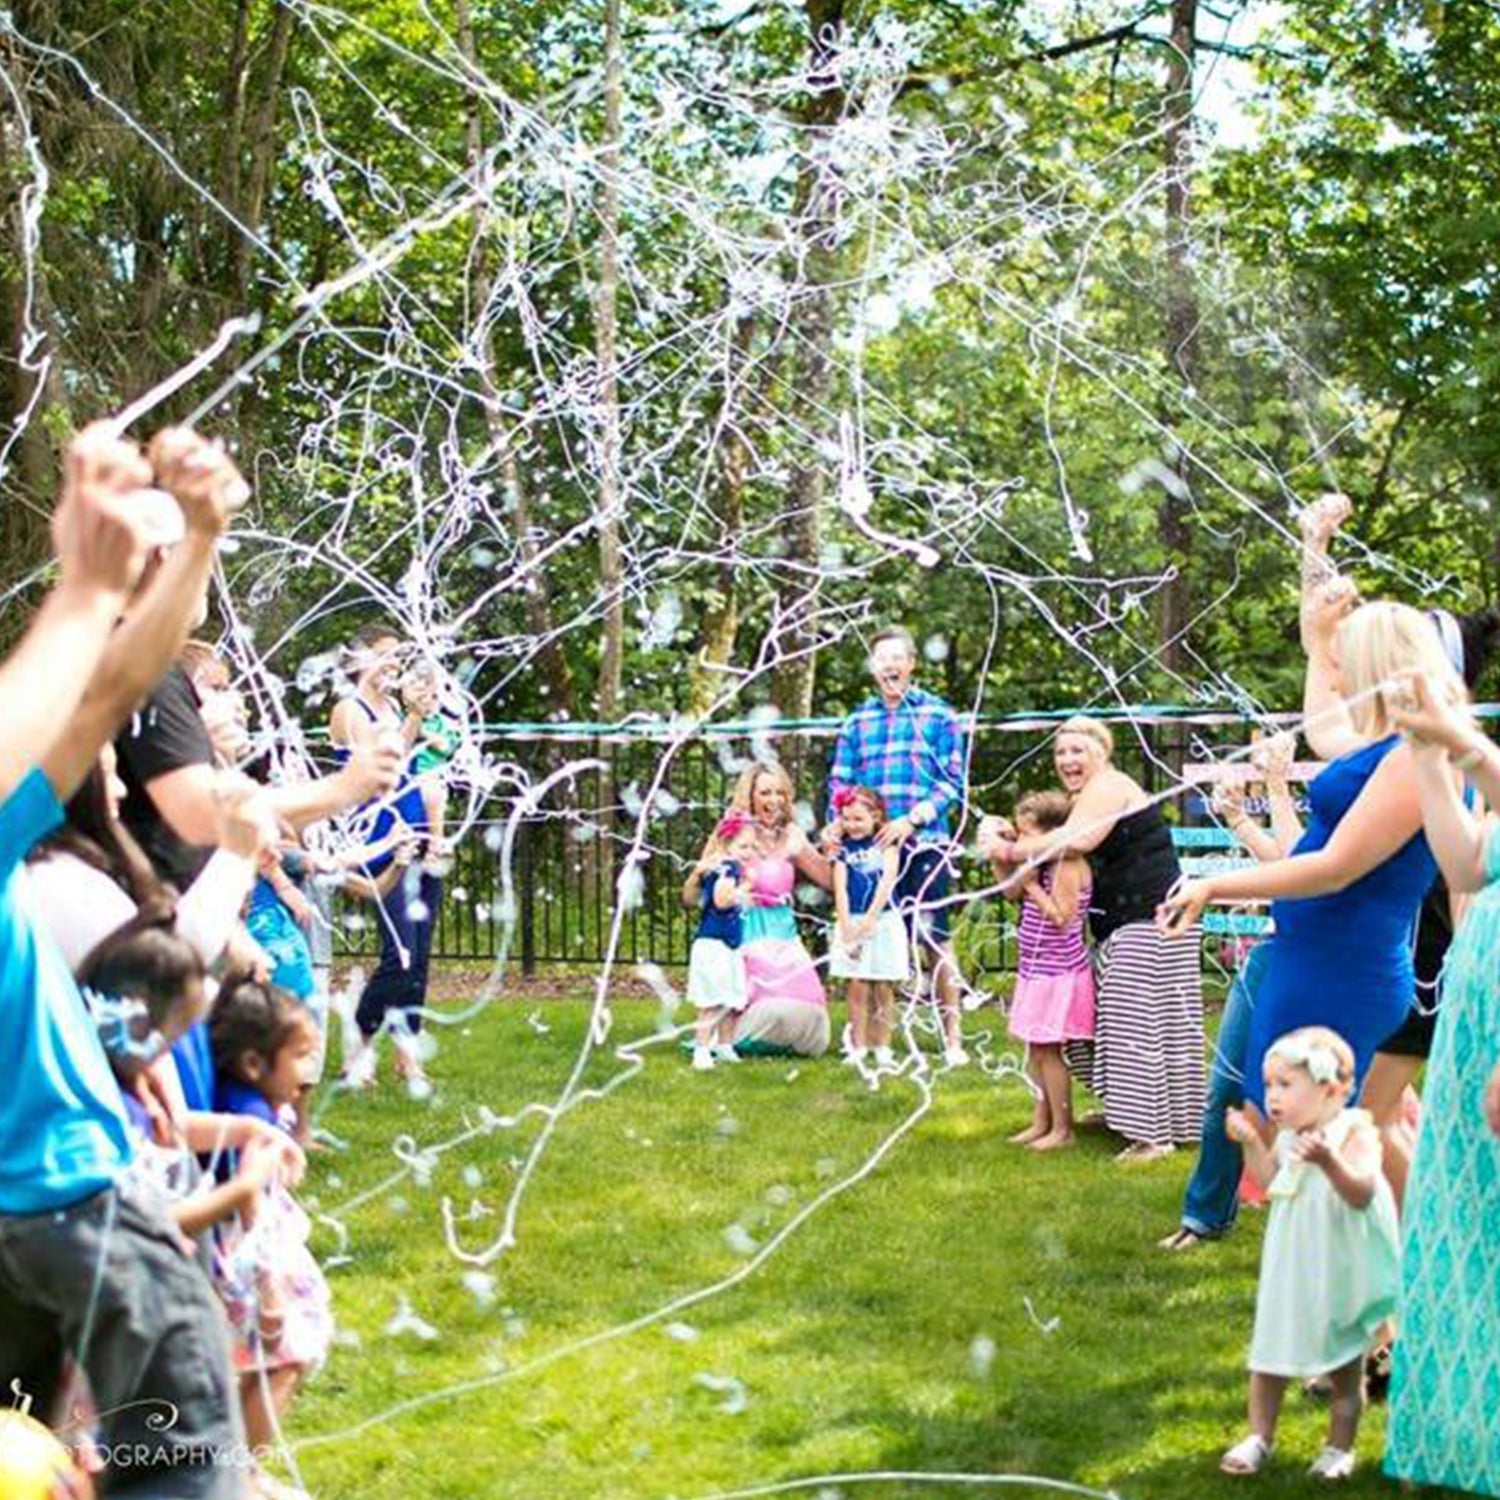 8082 Party Crazy Ribbon Spray used while doing parties and get-together celebrations and can be used by all kinds of people. DeoDap